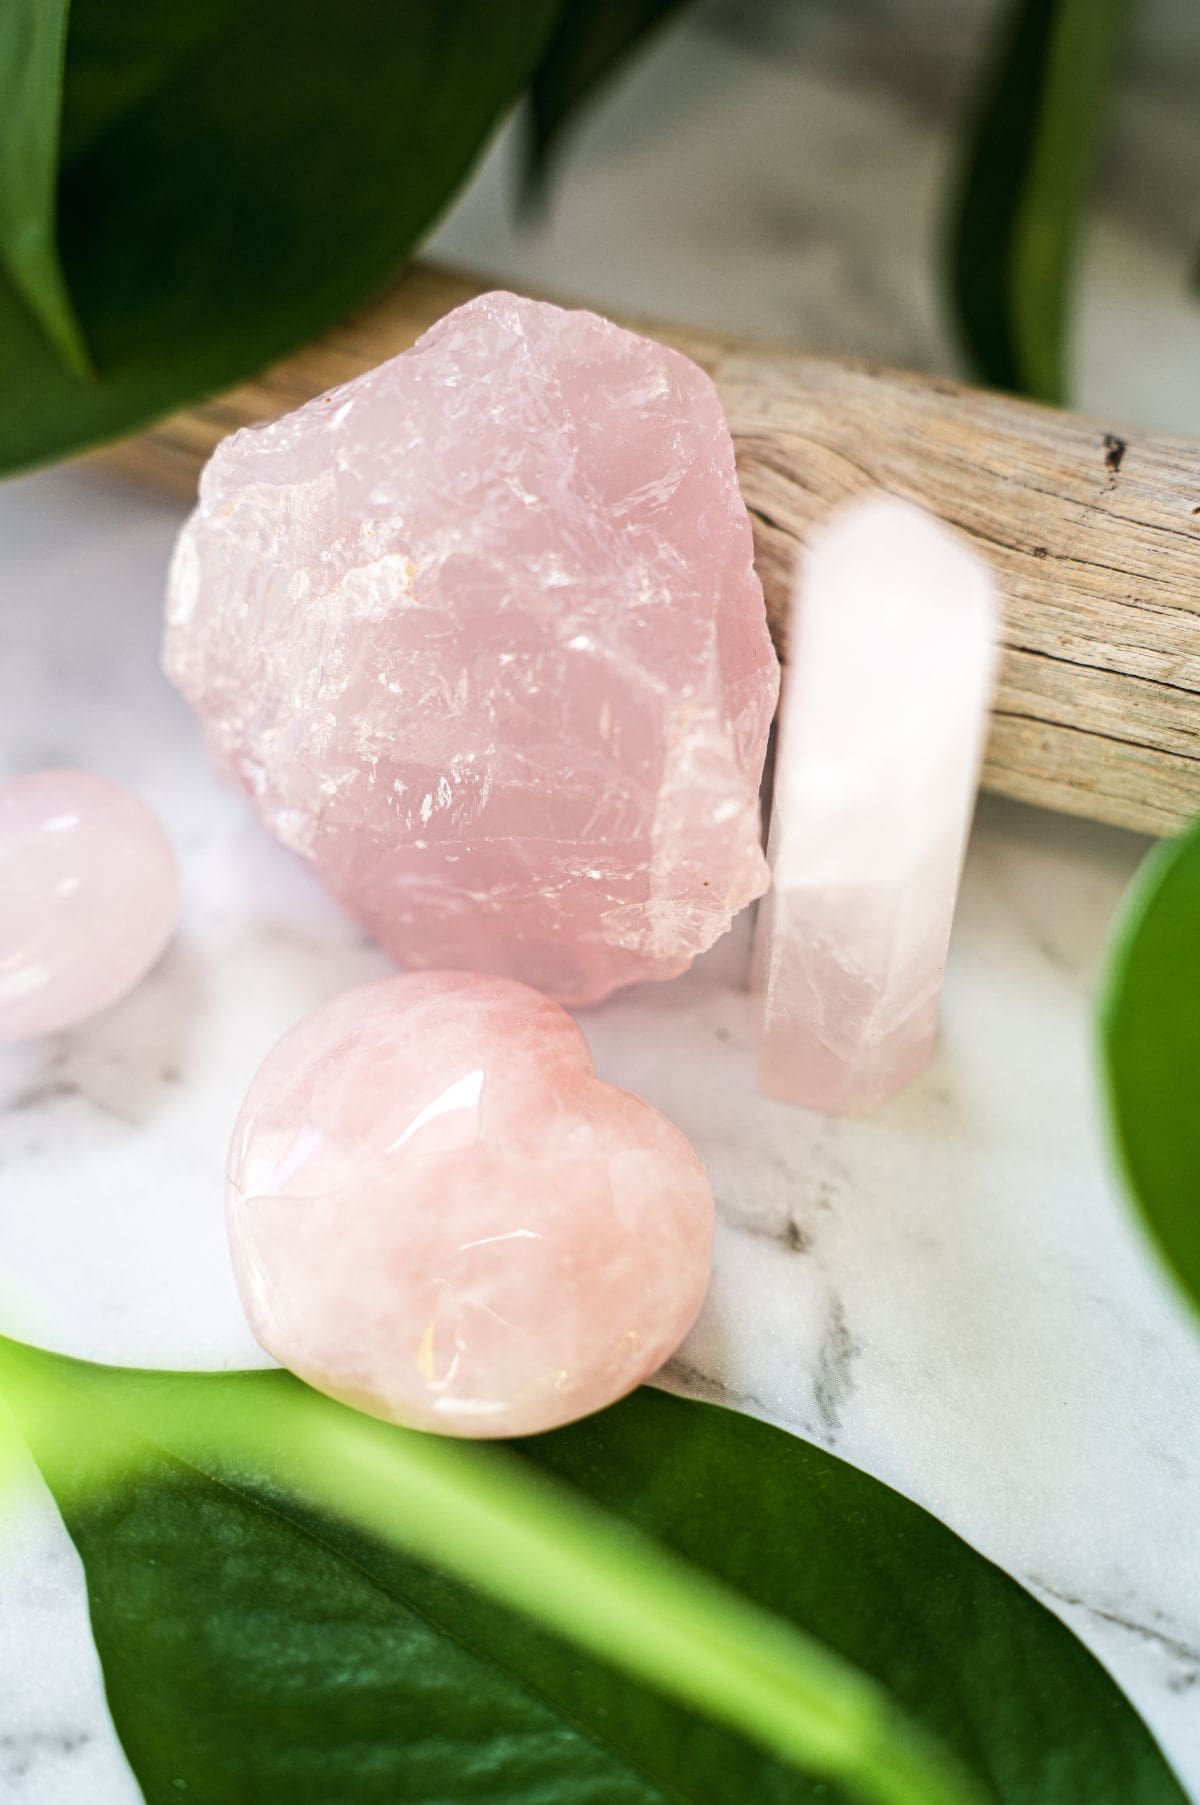 Unleash your inner strength and create a life you love with 111 powerful rose quartz affirmations. Embrace self-love and attract positivity into your life today.